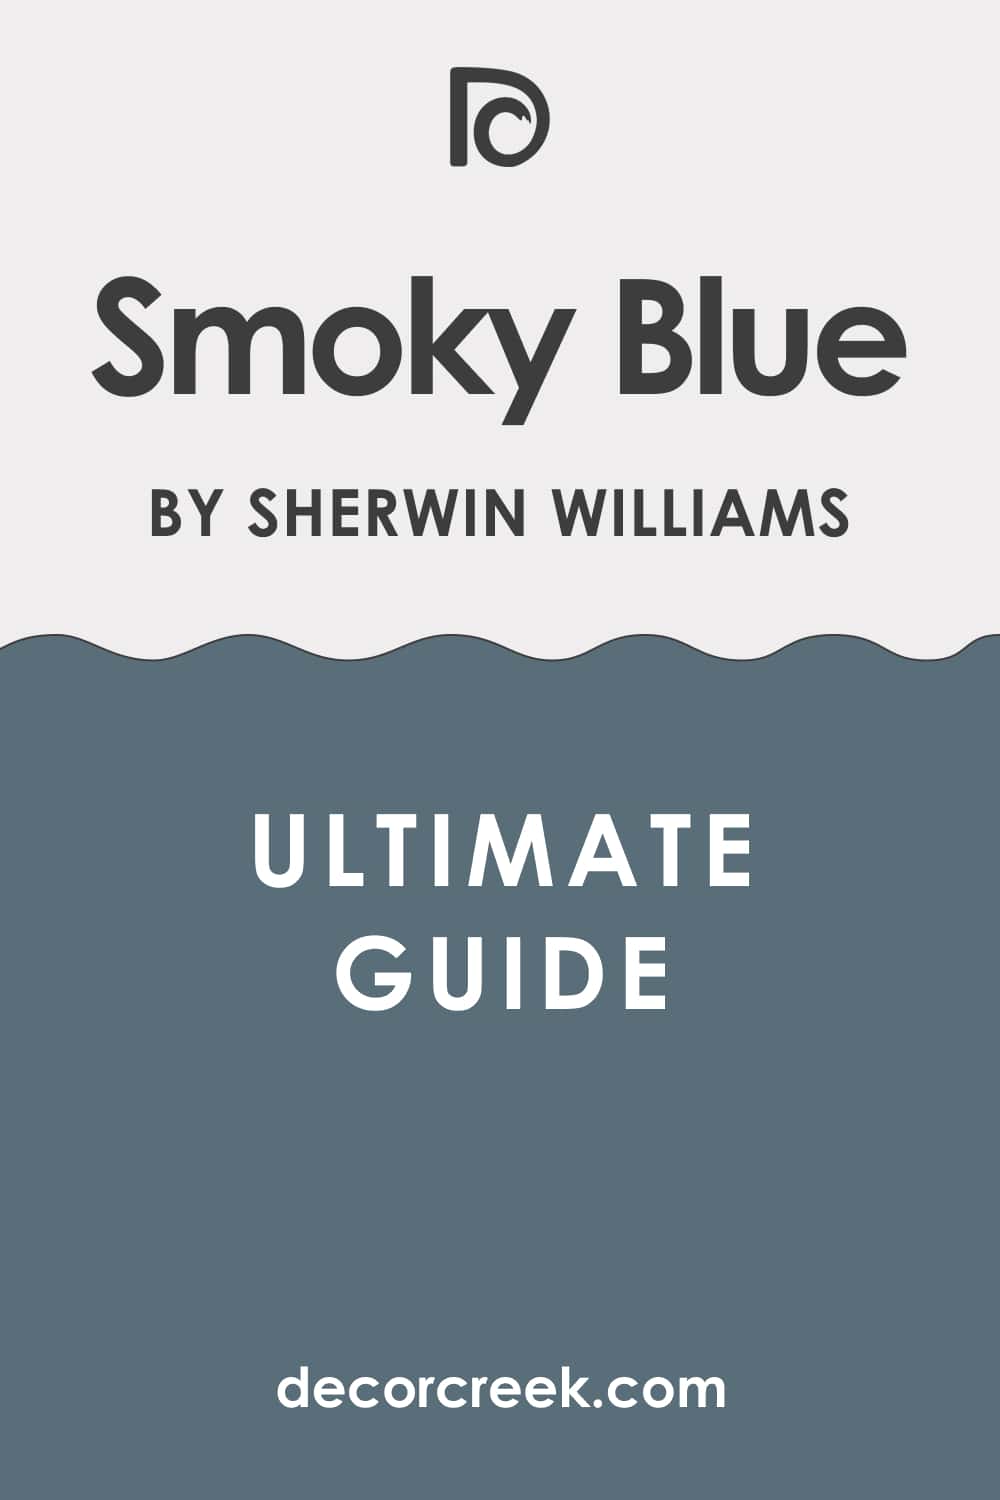 Ultimate Guide of Smoky Blue 